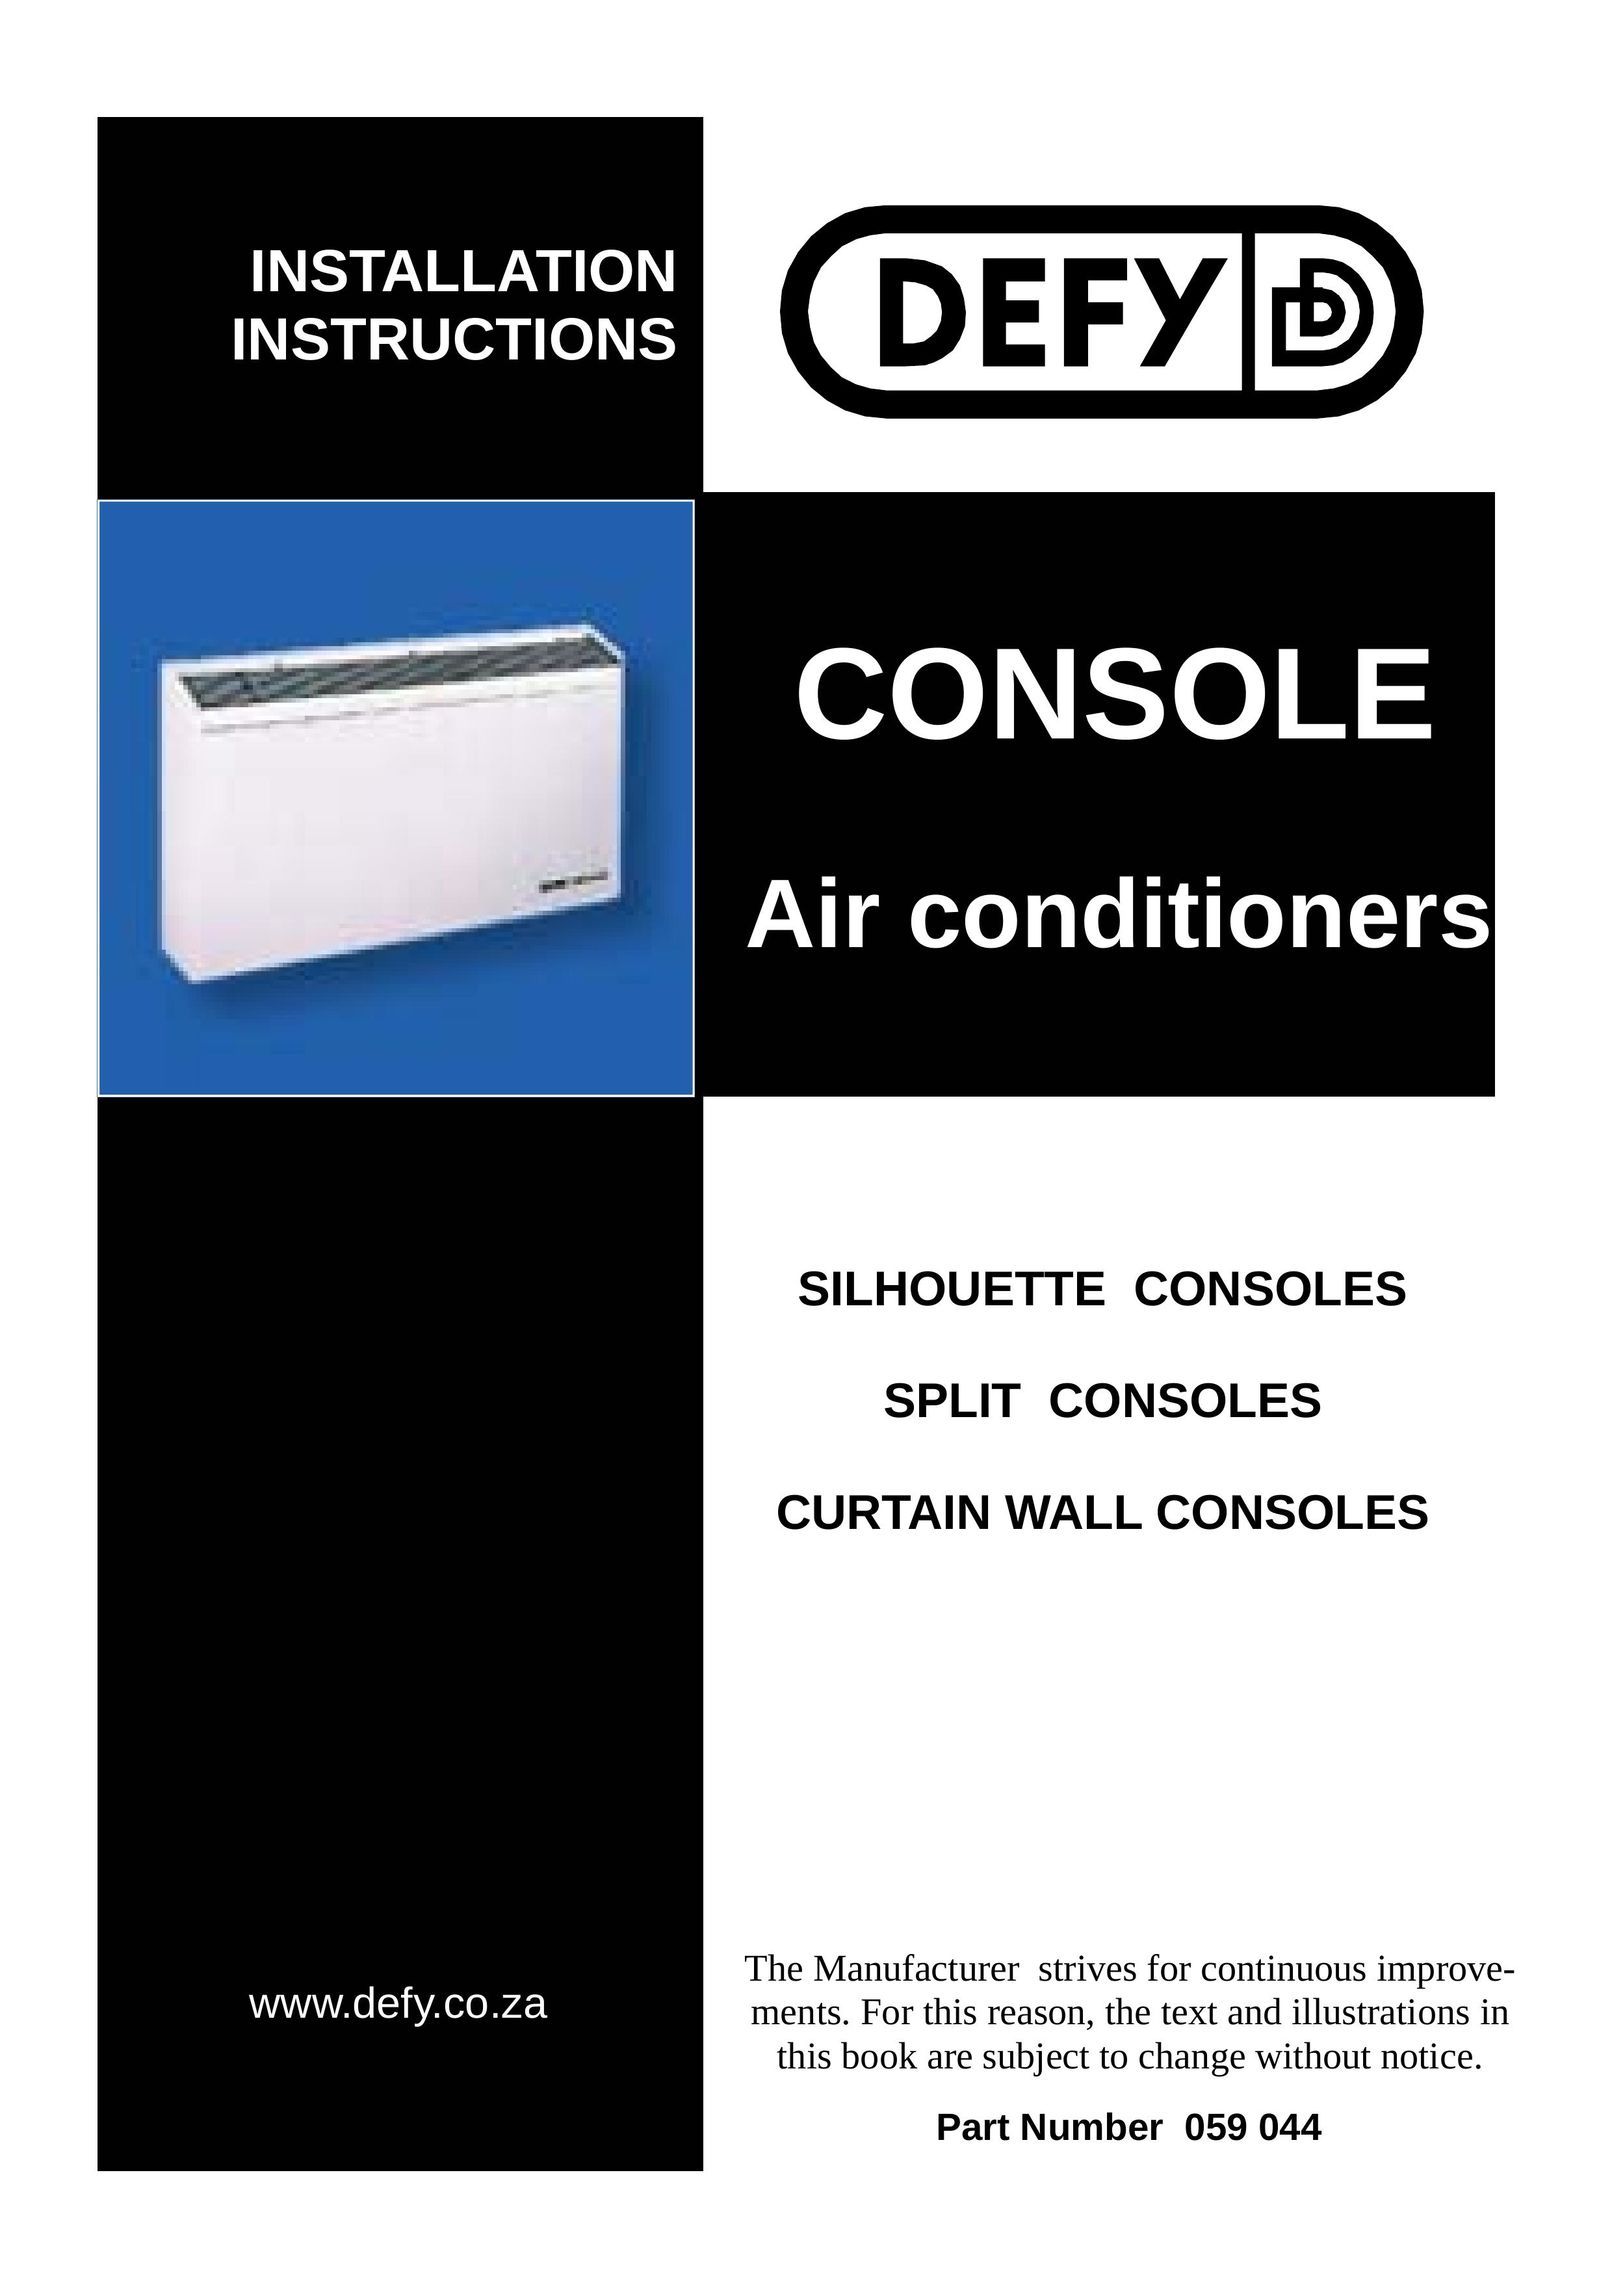 Defy Appliances Part Number 059 044 Air Conditioner User Manual